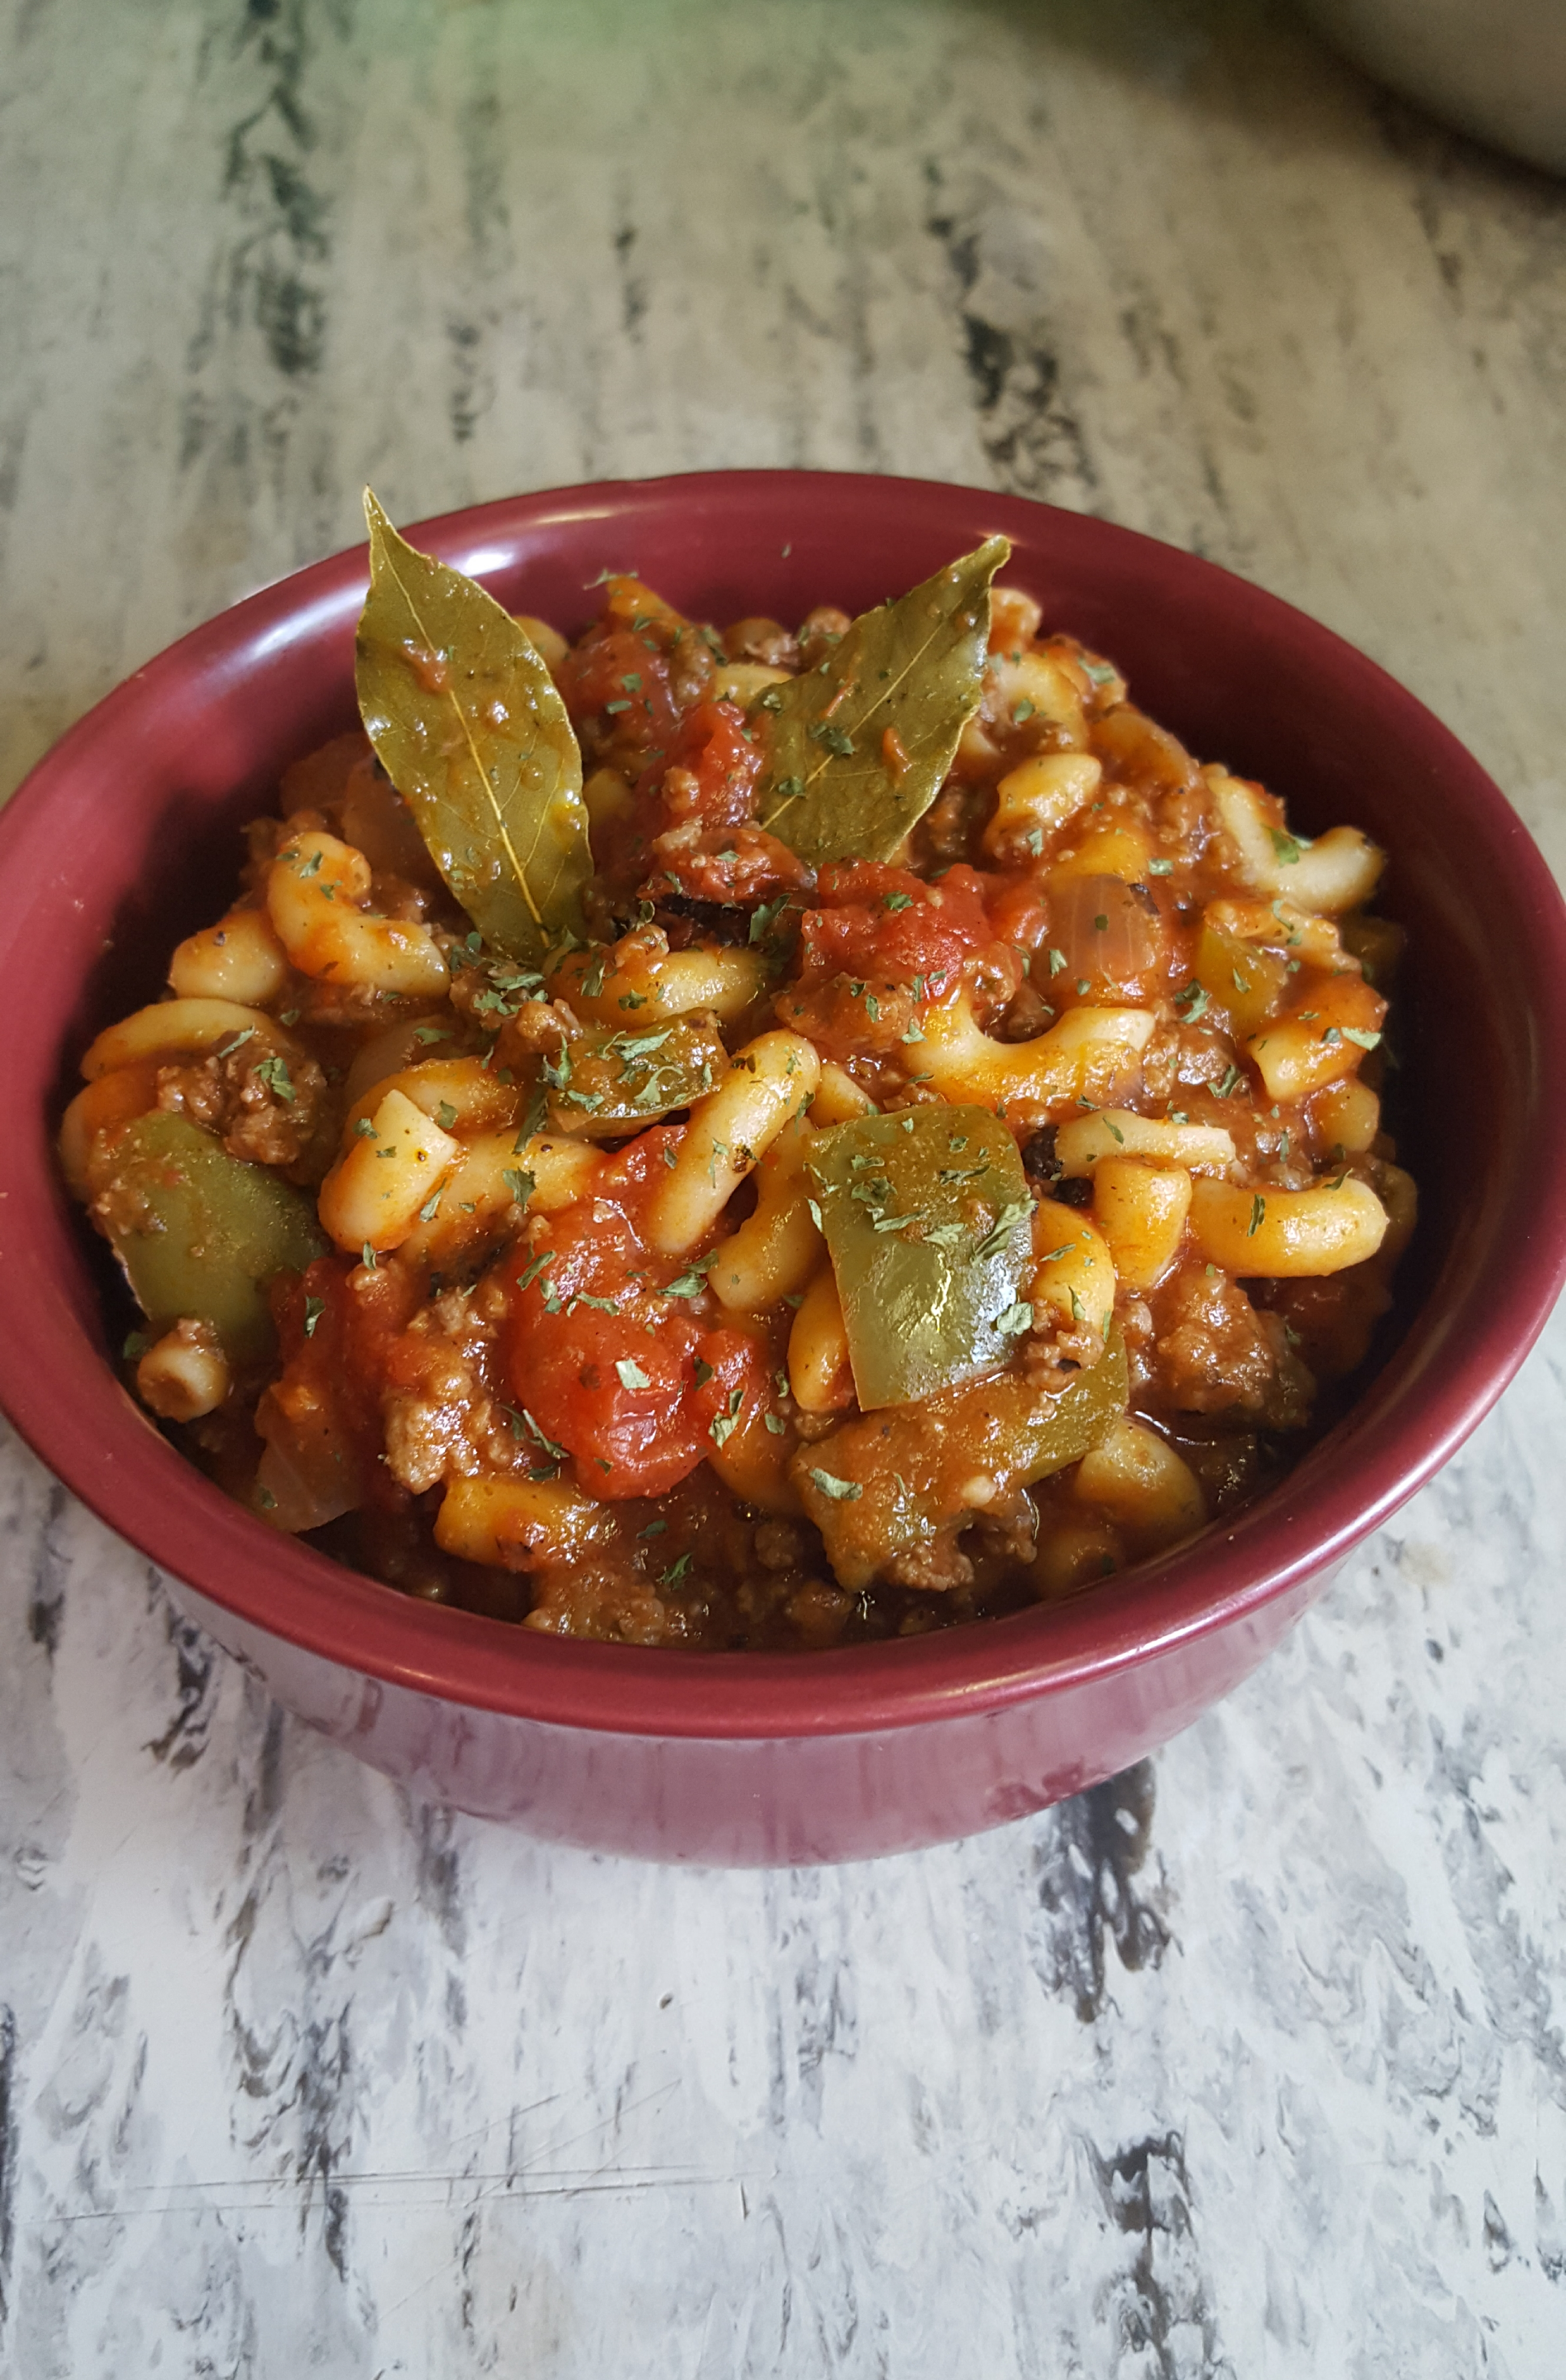 Country Goulash